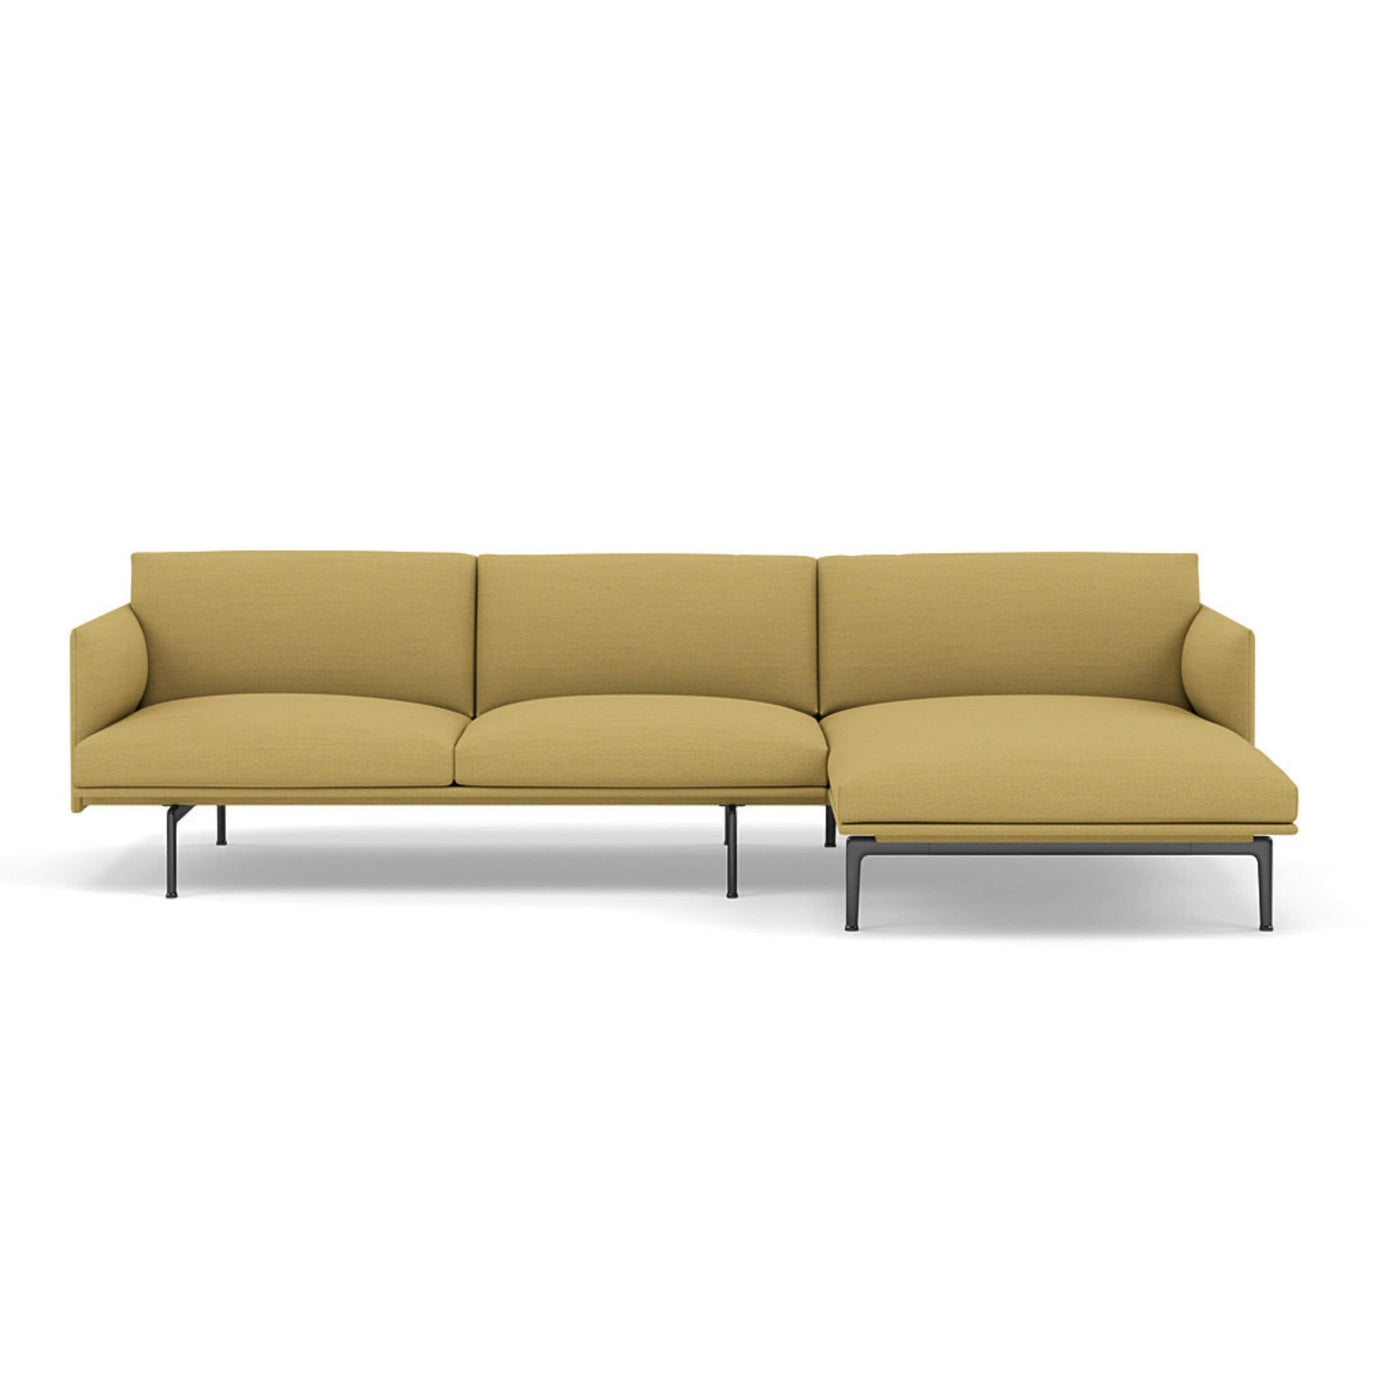 Muuto Outline Chaise Longue sofa in hallingdal 407. Made to order from someday designs. #colour_hallingdal-407